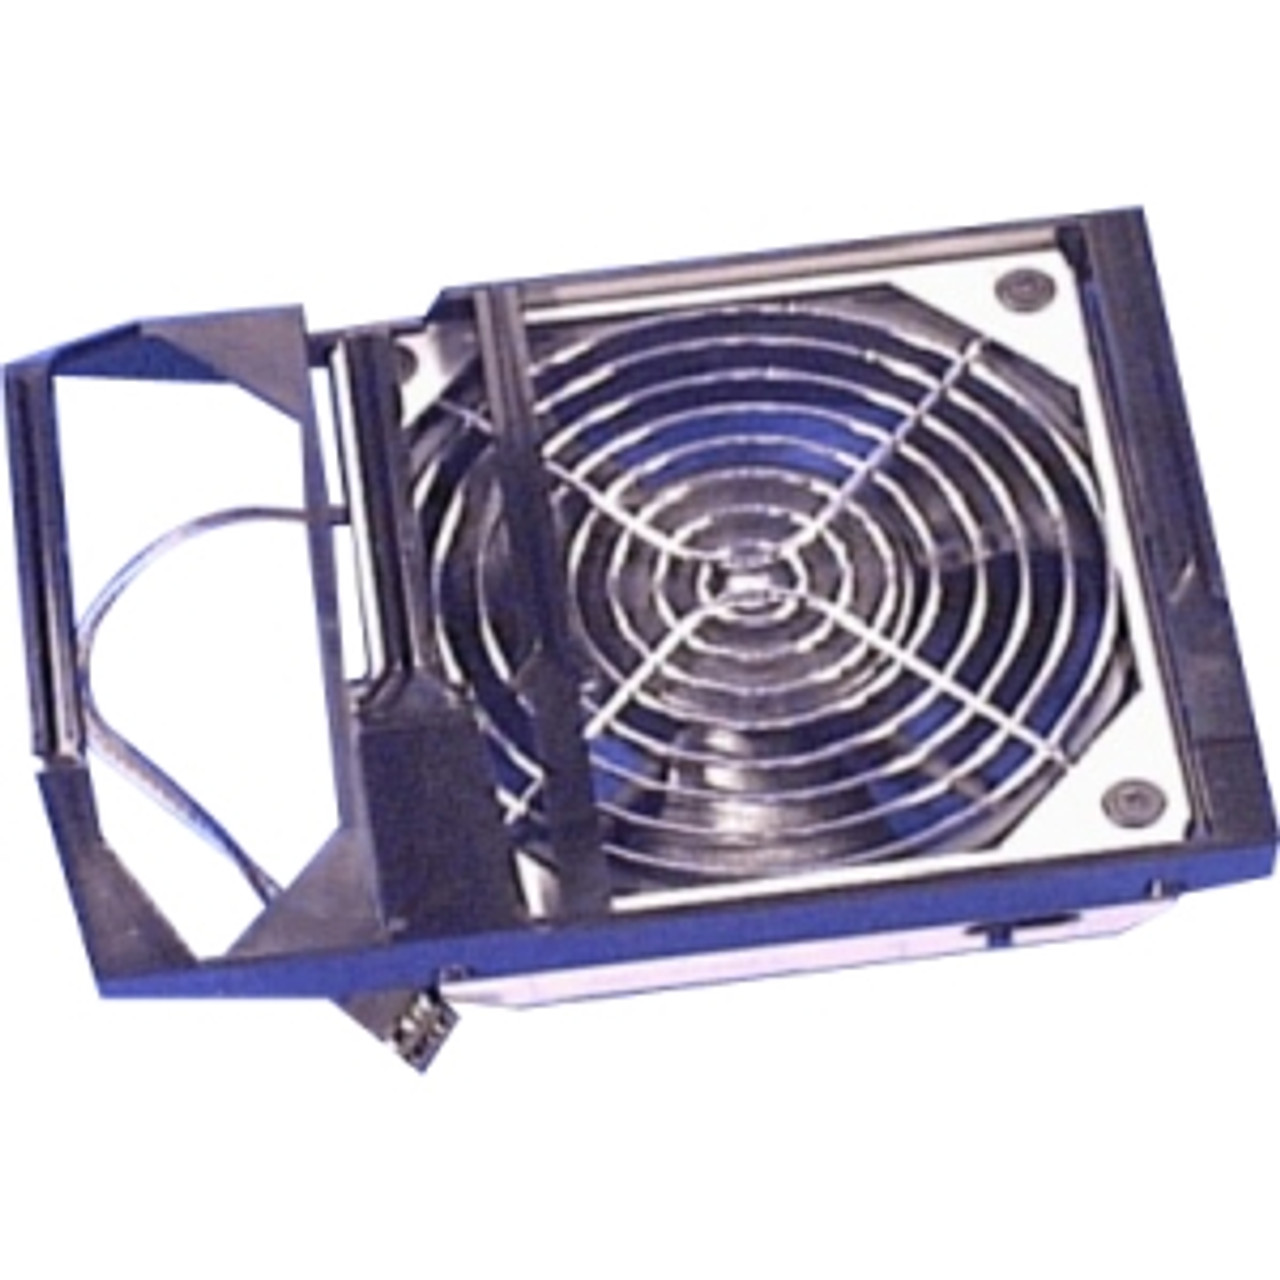 221077-001 Compaq System Fan with Board Guide